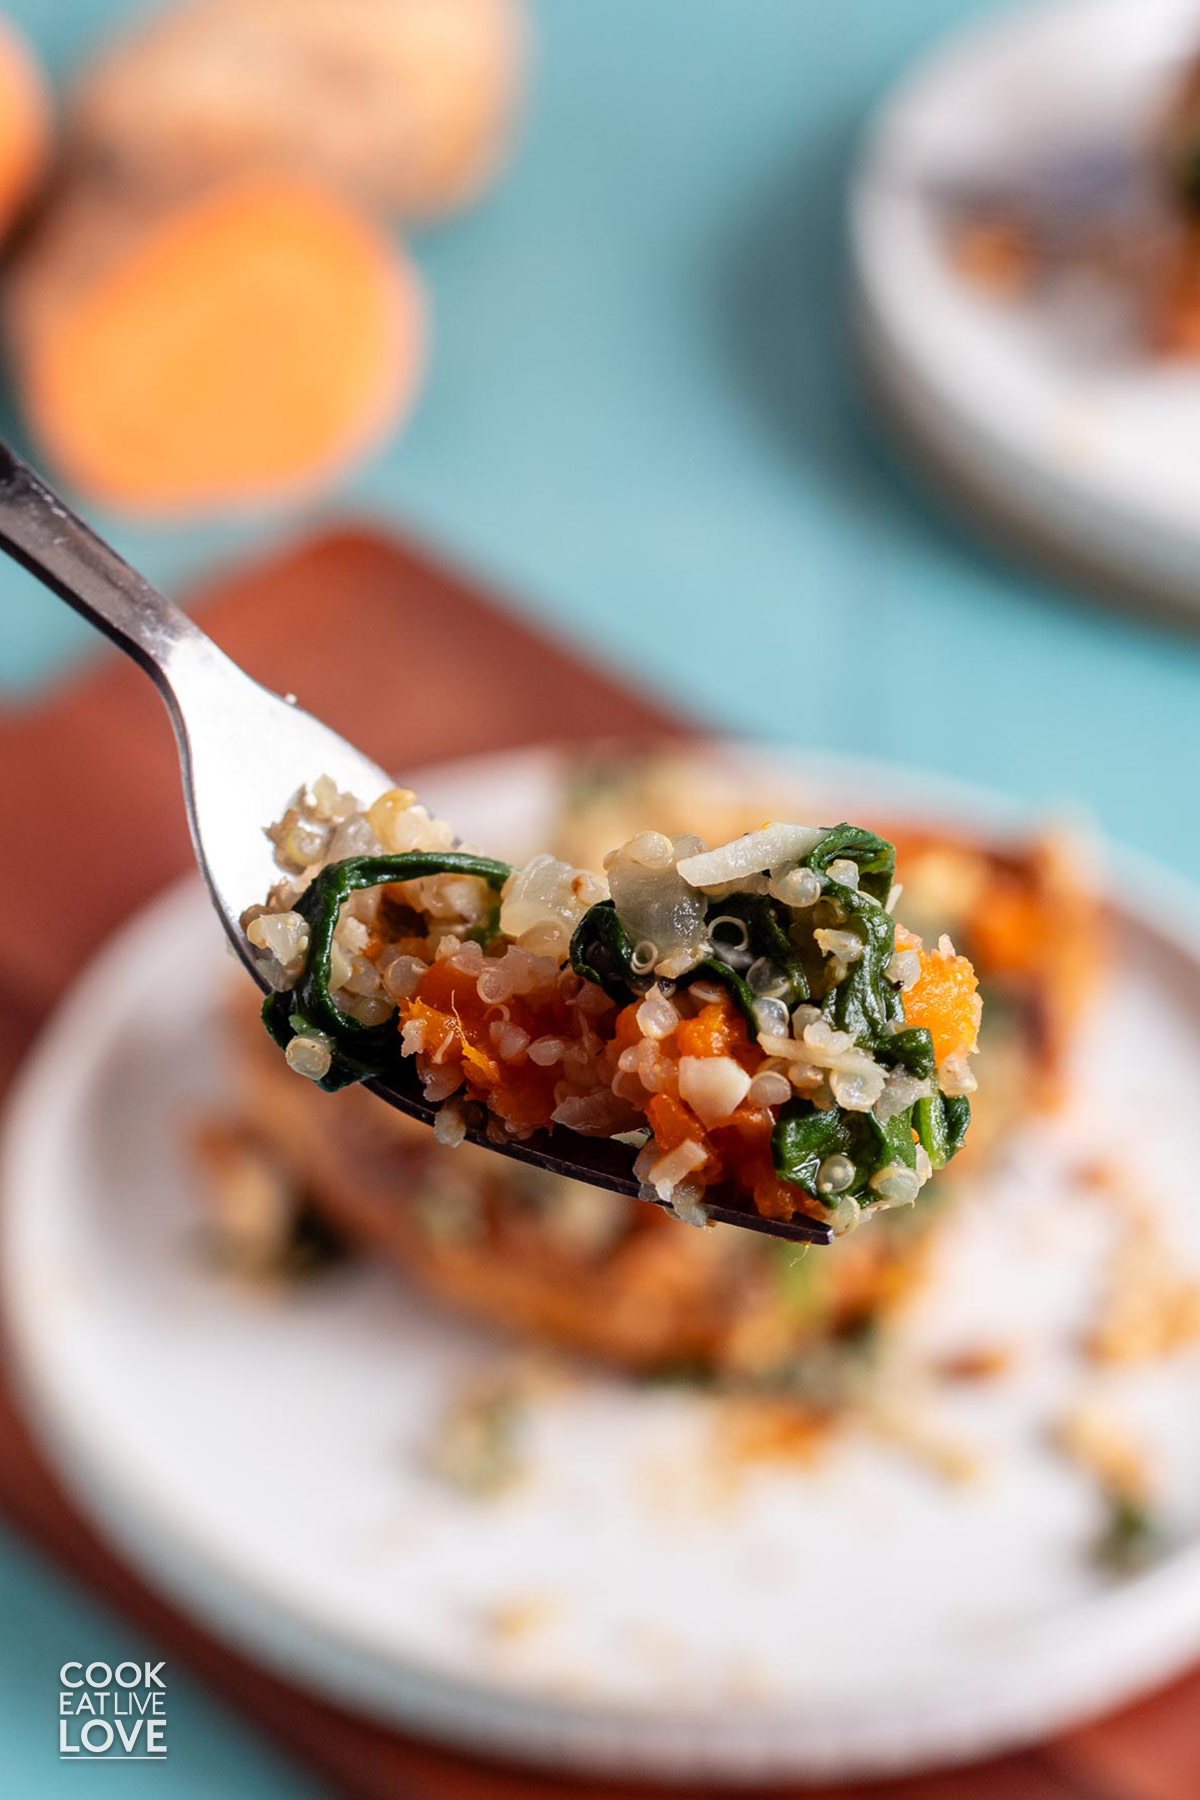 A forkful of sweet potato with quinoa and spinach held up over the plate.